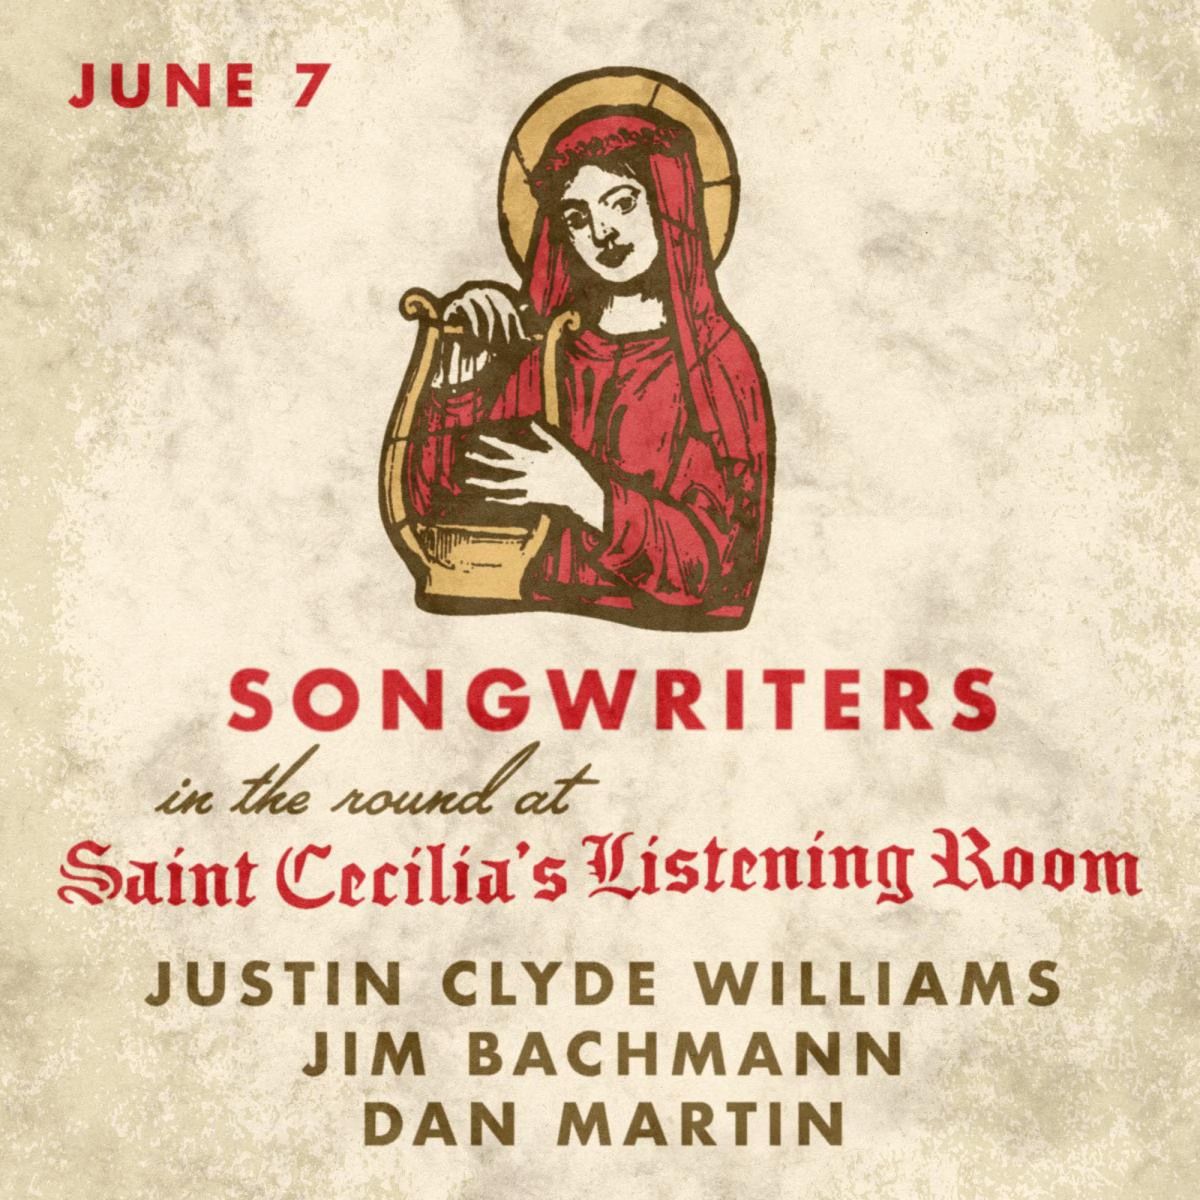 Songwriters in the Round - Justin Clyde Williams, Jim Bachmann, and Dan Martin